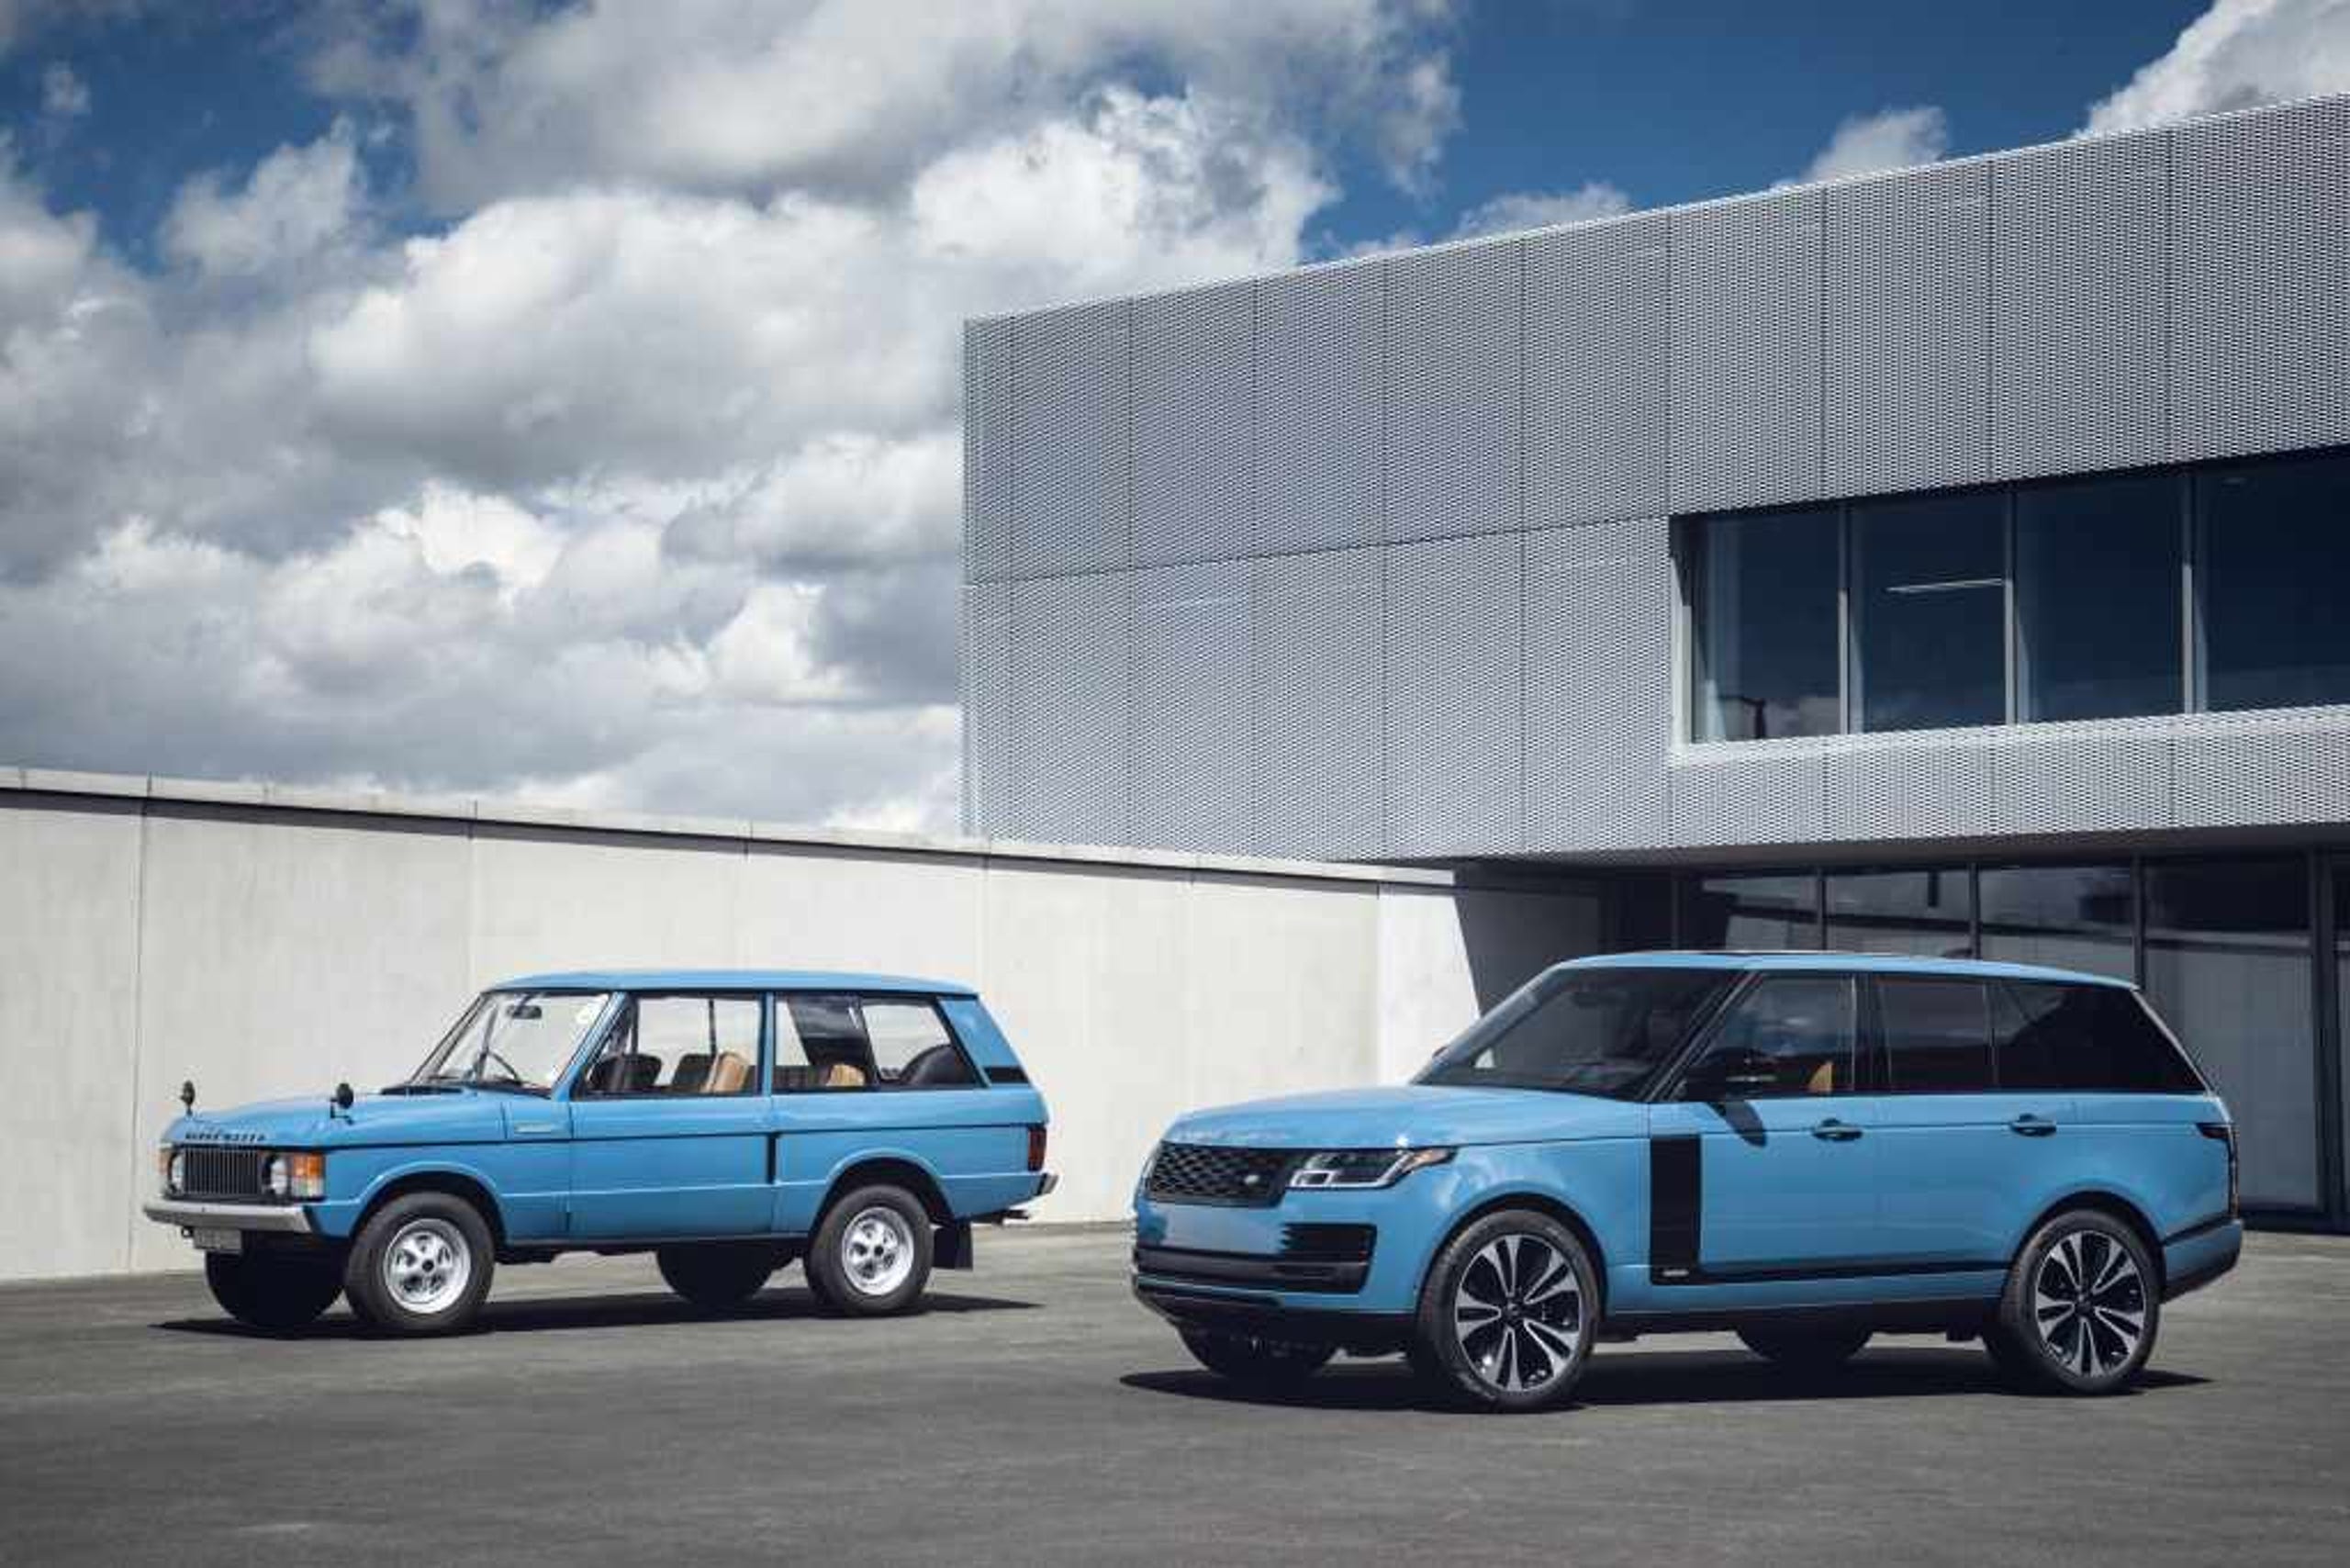 Mondwater nadering straf Range Rover turns 50: New SUV harks to the 1970's original